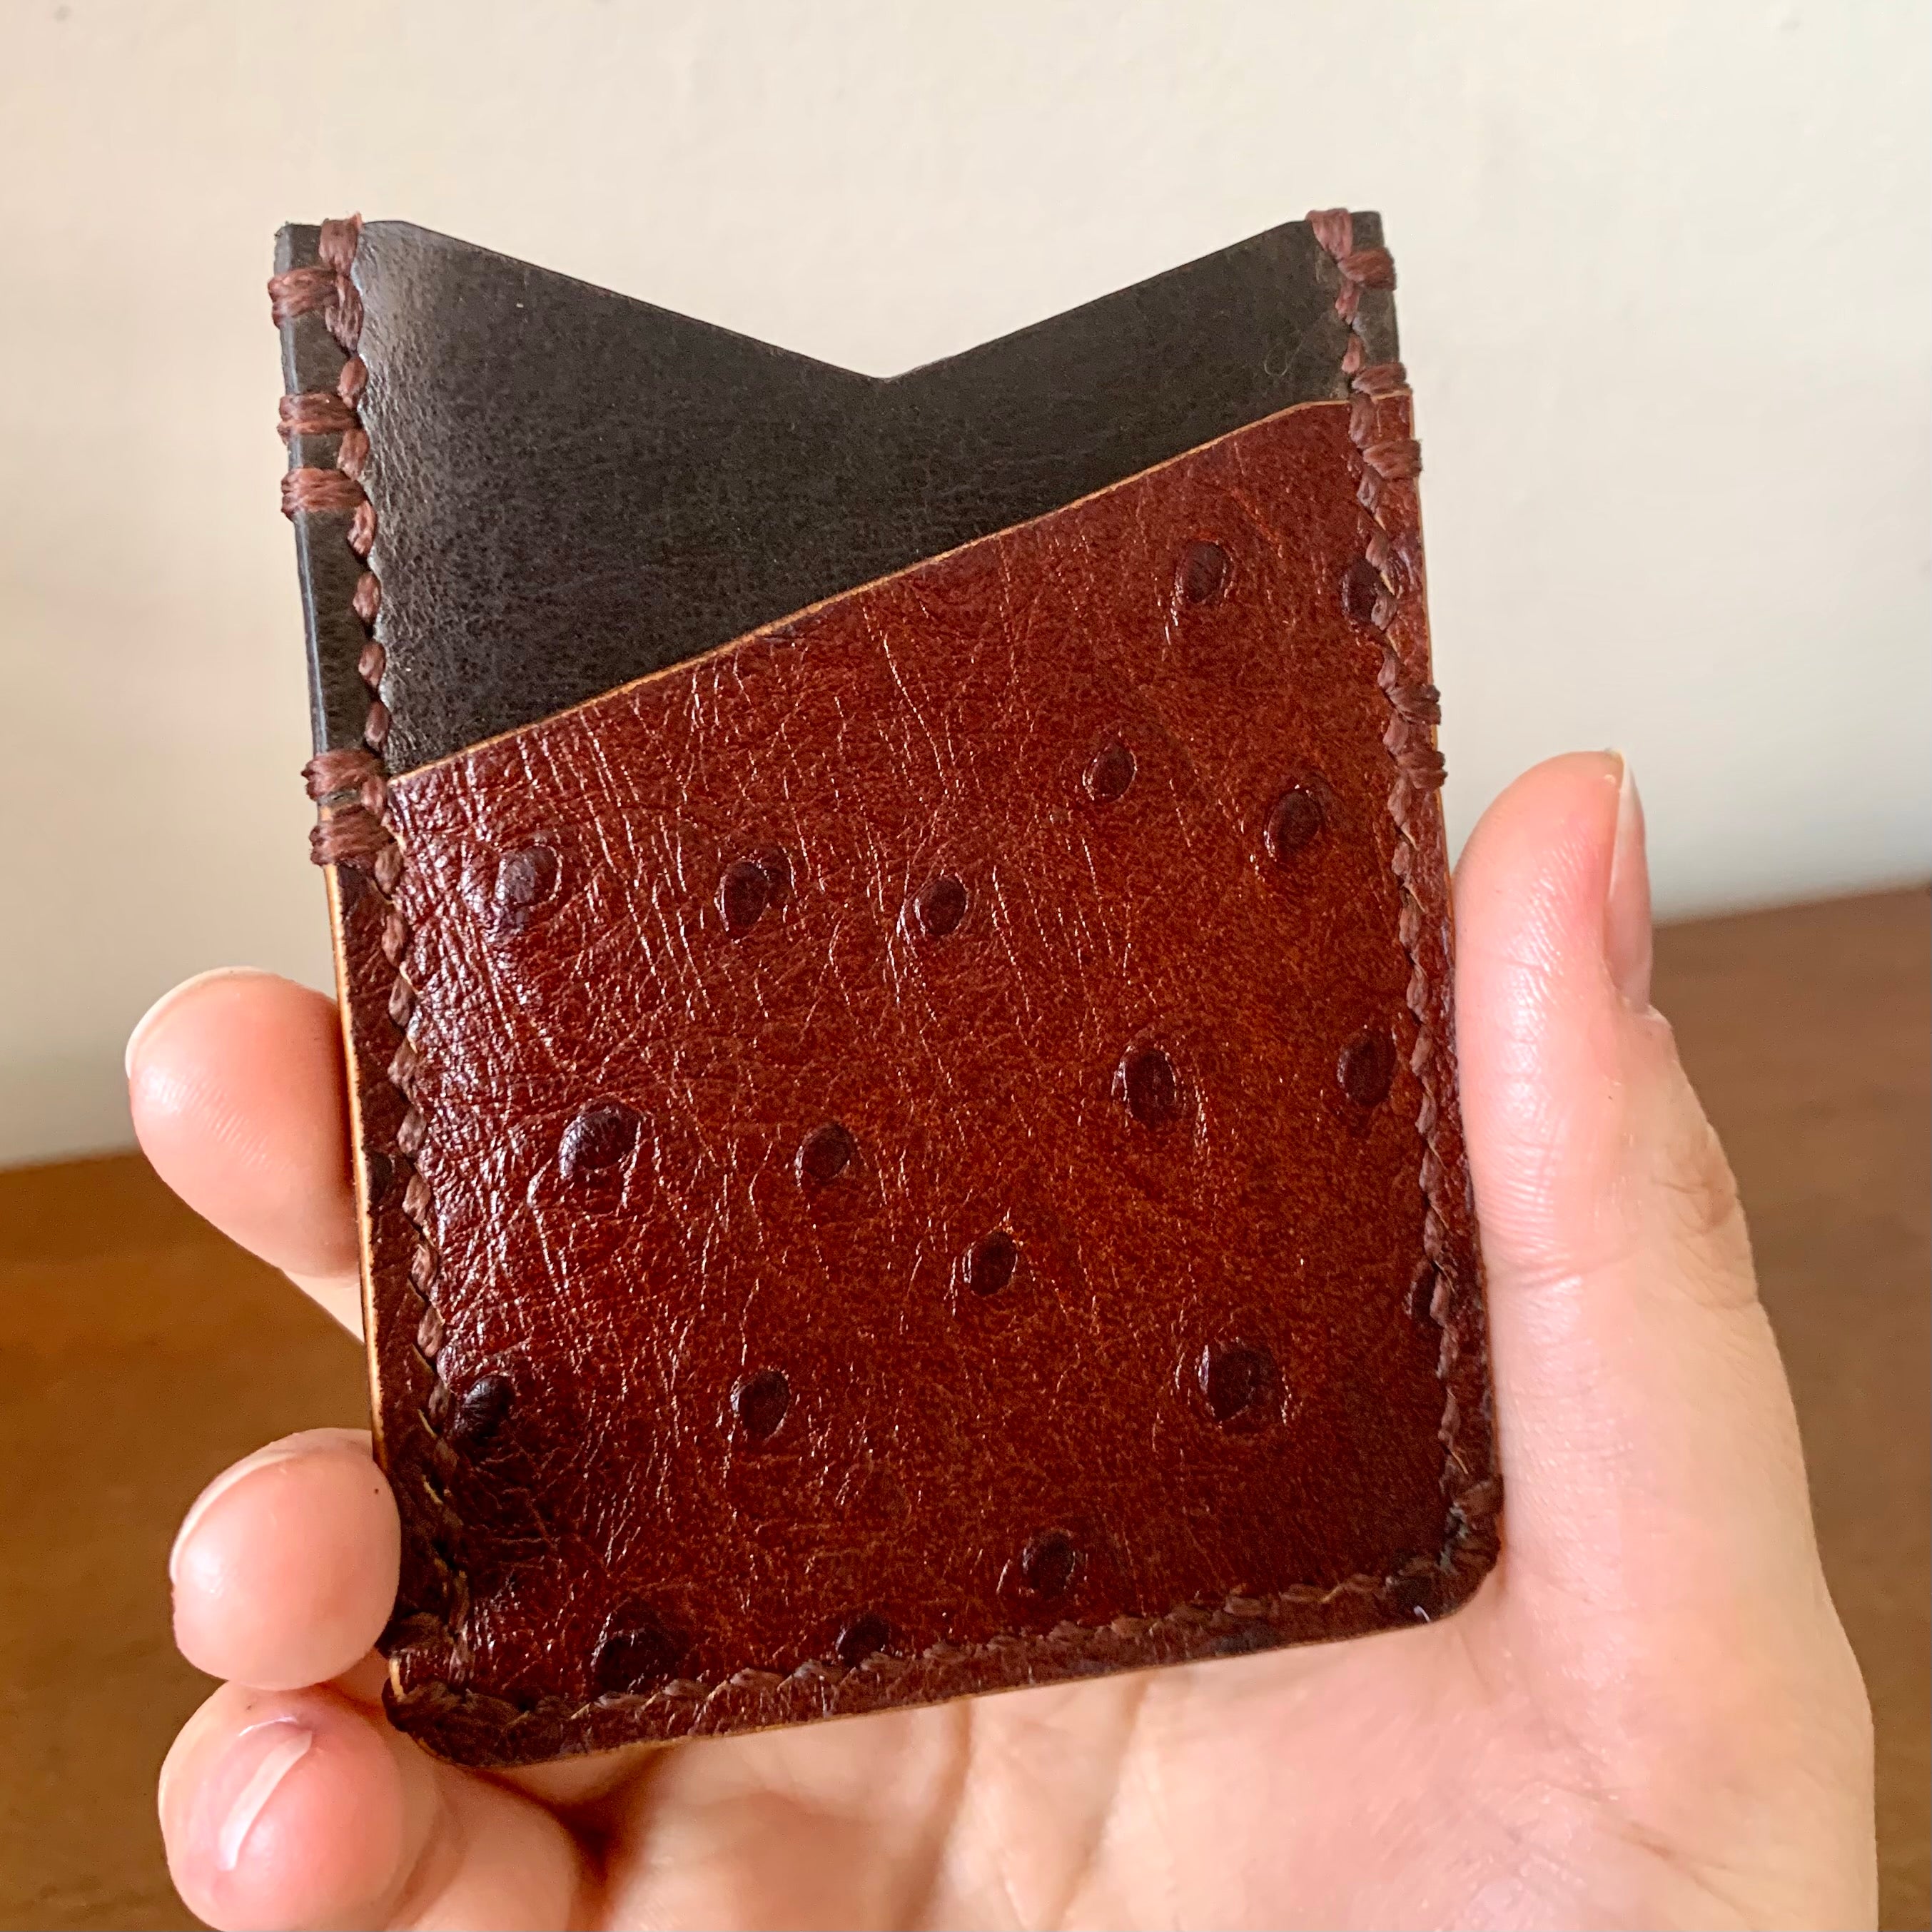 Card Holder Leather Ostrich Brown